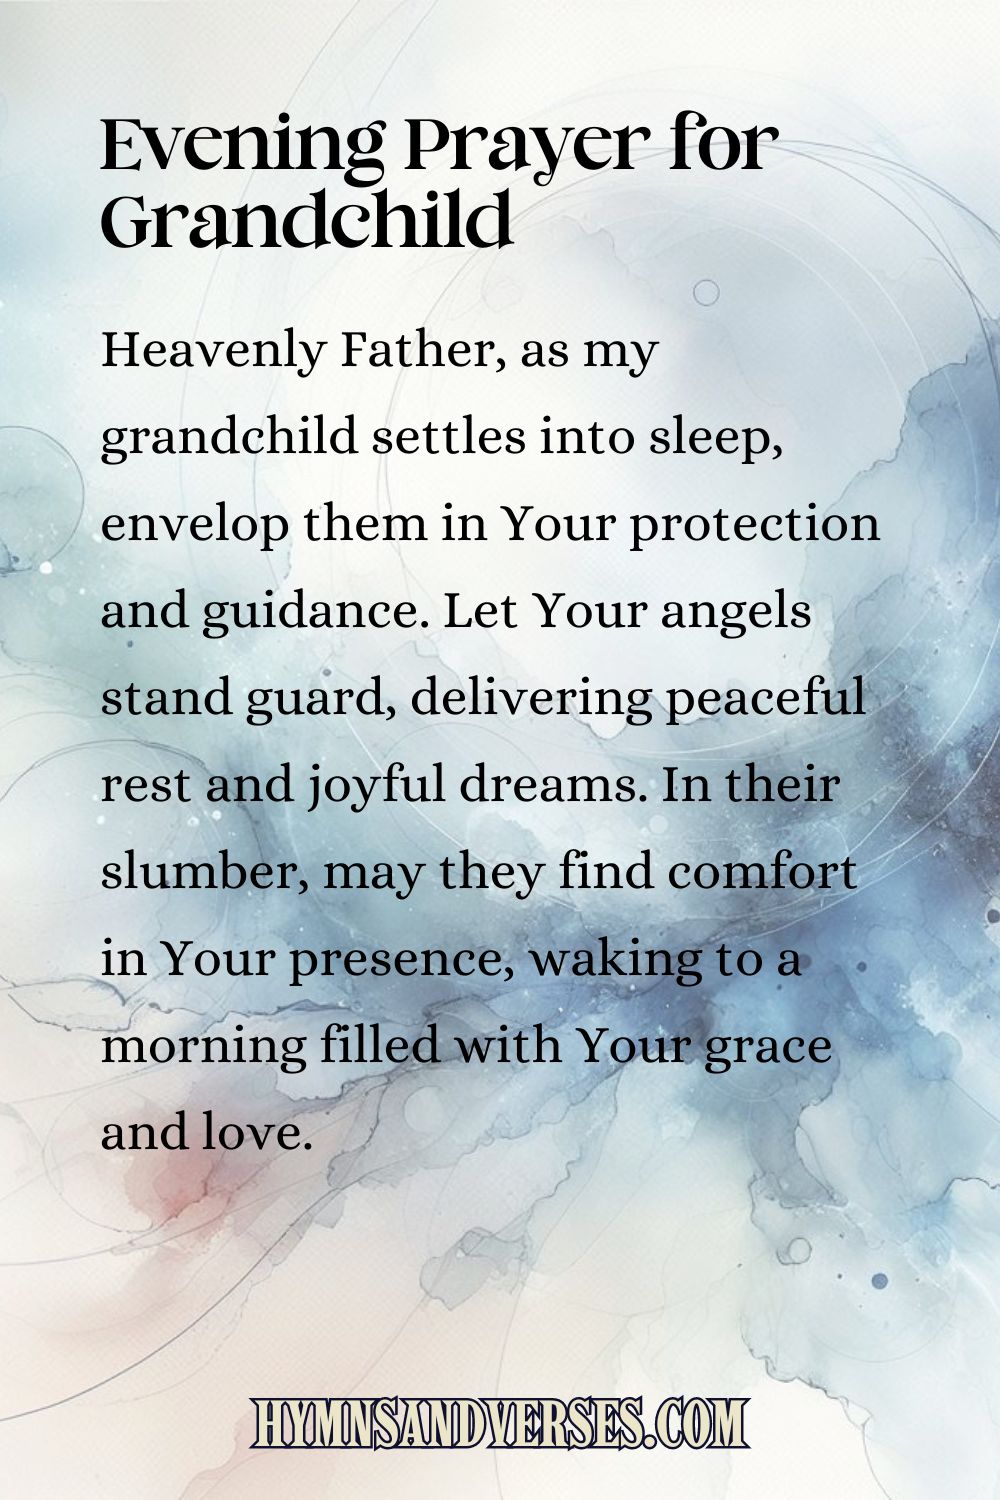 Pin sized image for evening prayer for grandchild, reads: Heavenly Father, as my grandchild settles into sleep, envelop them in Your protection and guidance. Let Your angels stand guard, delivering peaceful rest and joyful dreams. In their slumber, may they find comfort in Your presence, waking to a morning filled with Your grace and love.